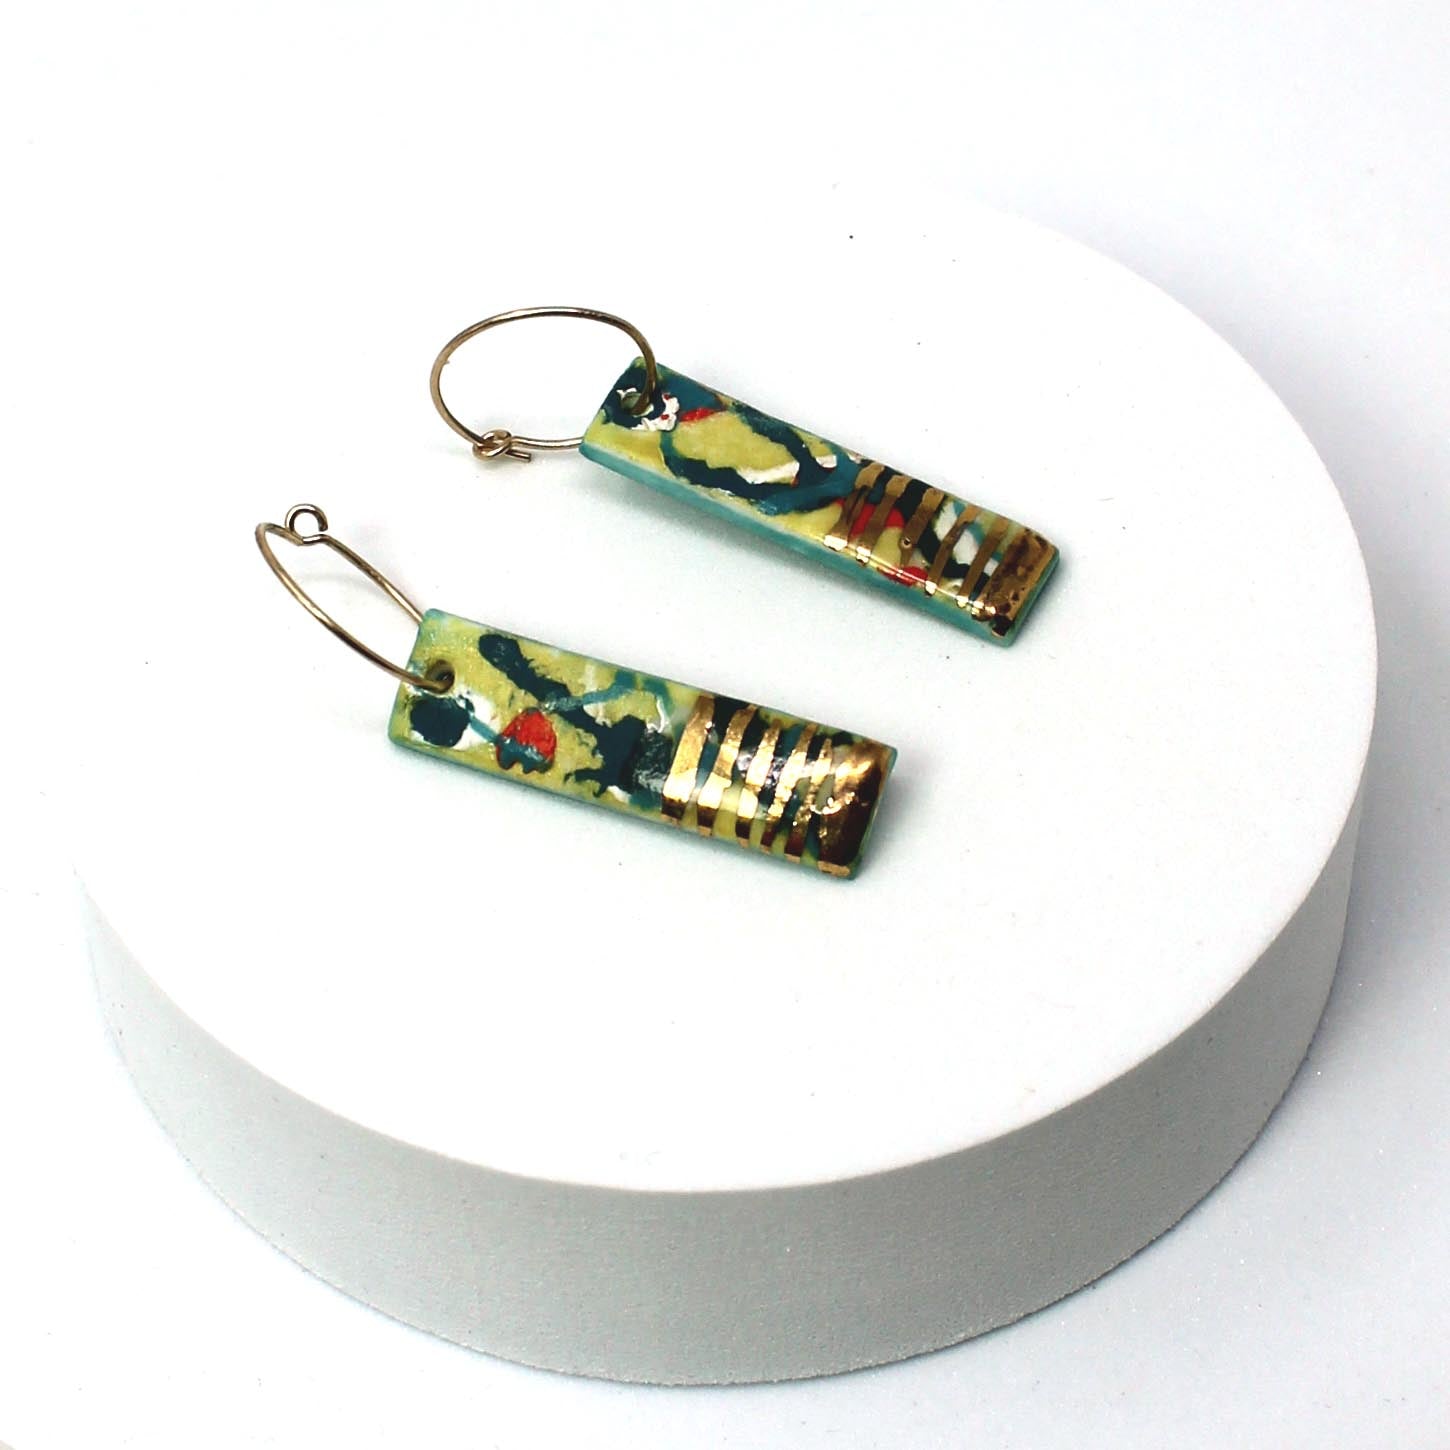 Rectangle Chime Green Patterned Porcelain Hoop Earrings with 24k Gold Lustre